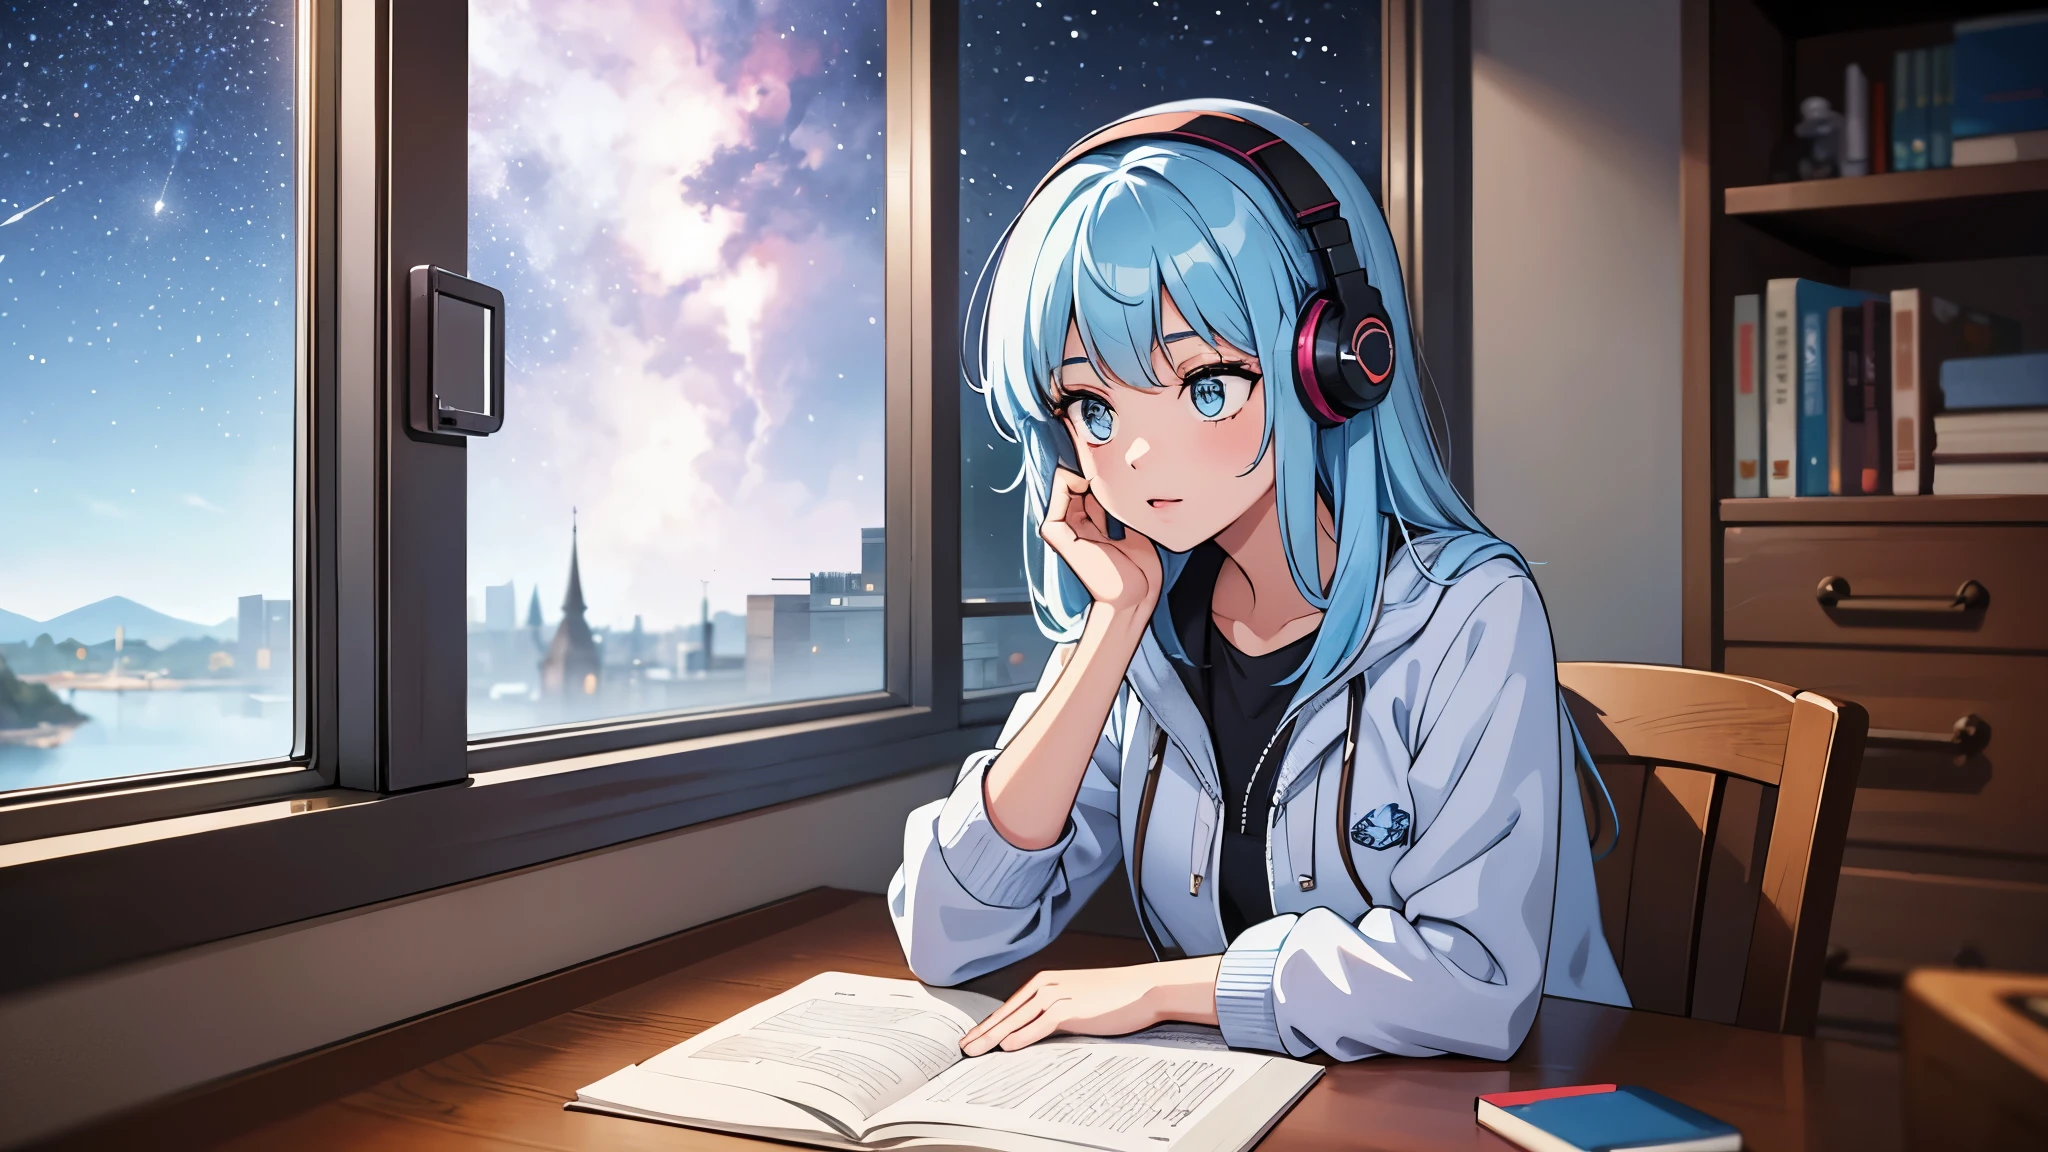 An 18-year-old woman with a heart-shaped face, blemish-free white skin, sky blue hair, and distinct features. She is studying alone in her room, taking notes in a book. The room is calm and has lighting, and the stars twinkle outside the window. You can see her side profile. The night view is shining outside the window. There is a pencil holder for writing utensils in front of her. She wears headphones and listens to music. Her eyes are on the book. The room has a modern interior.